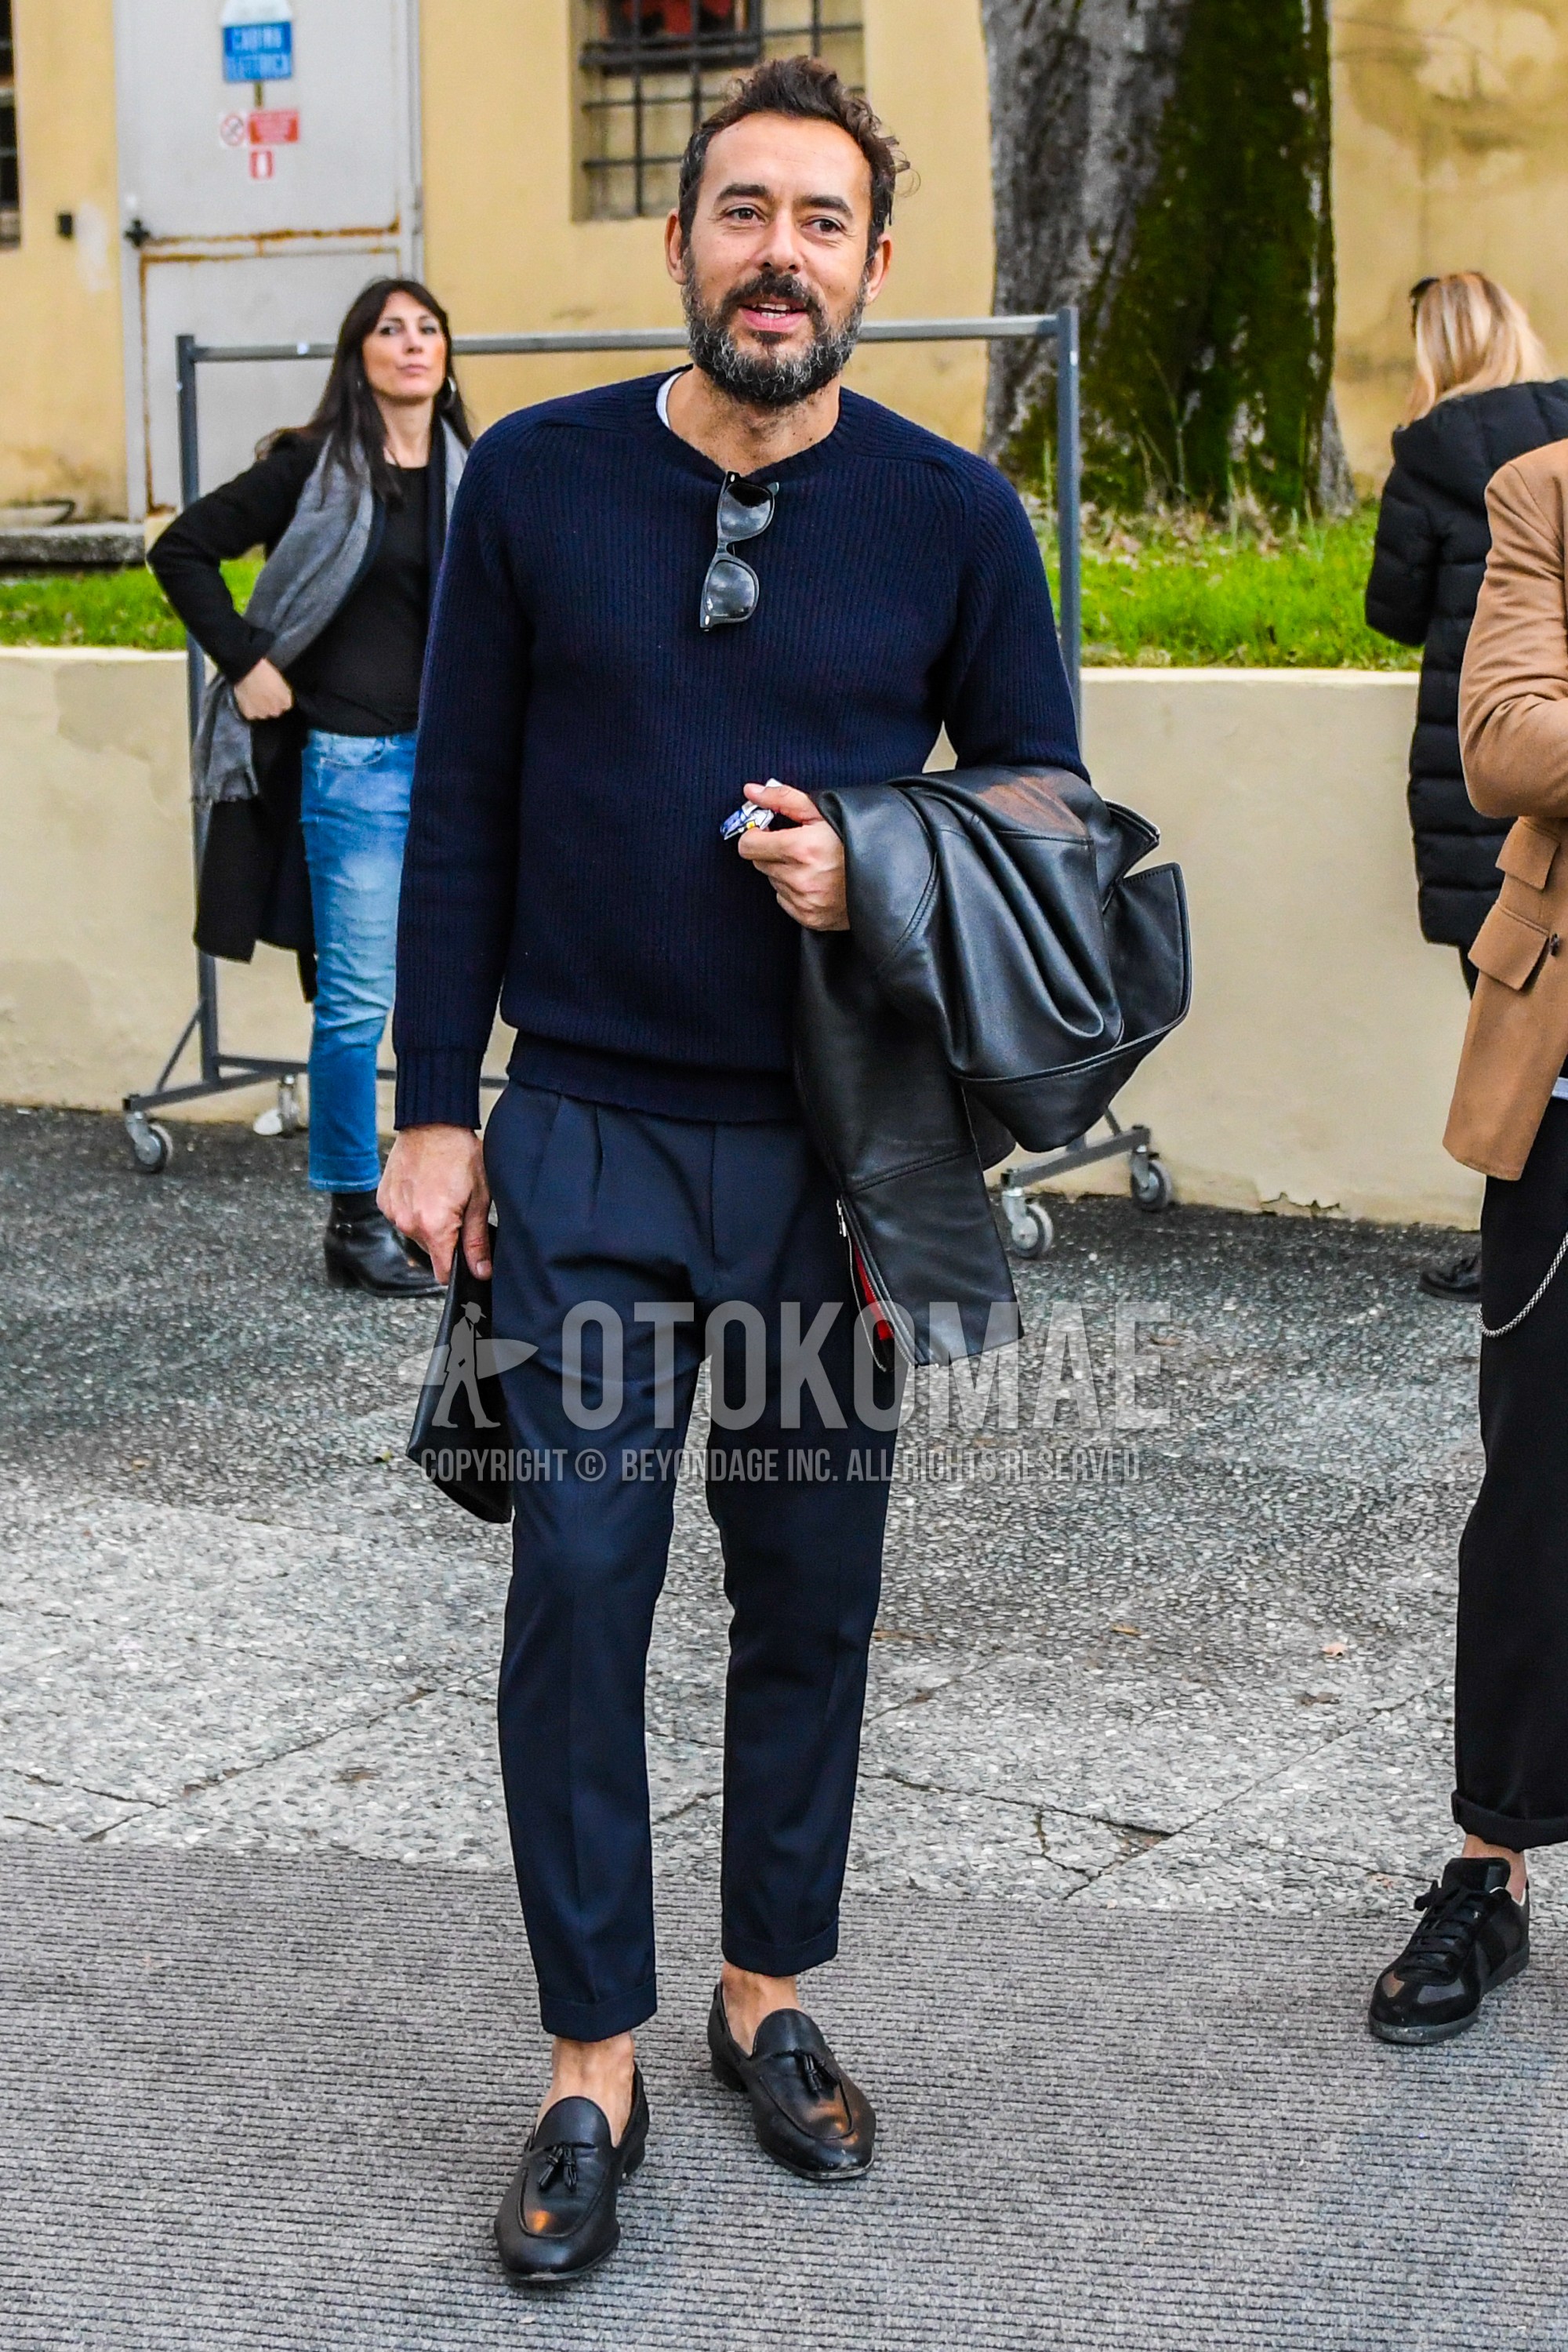 Men's autumn winter outfit with navy plain sweater, navy plain slacks, black tassel loafers leather shoes.